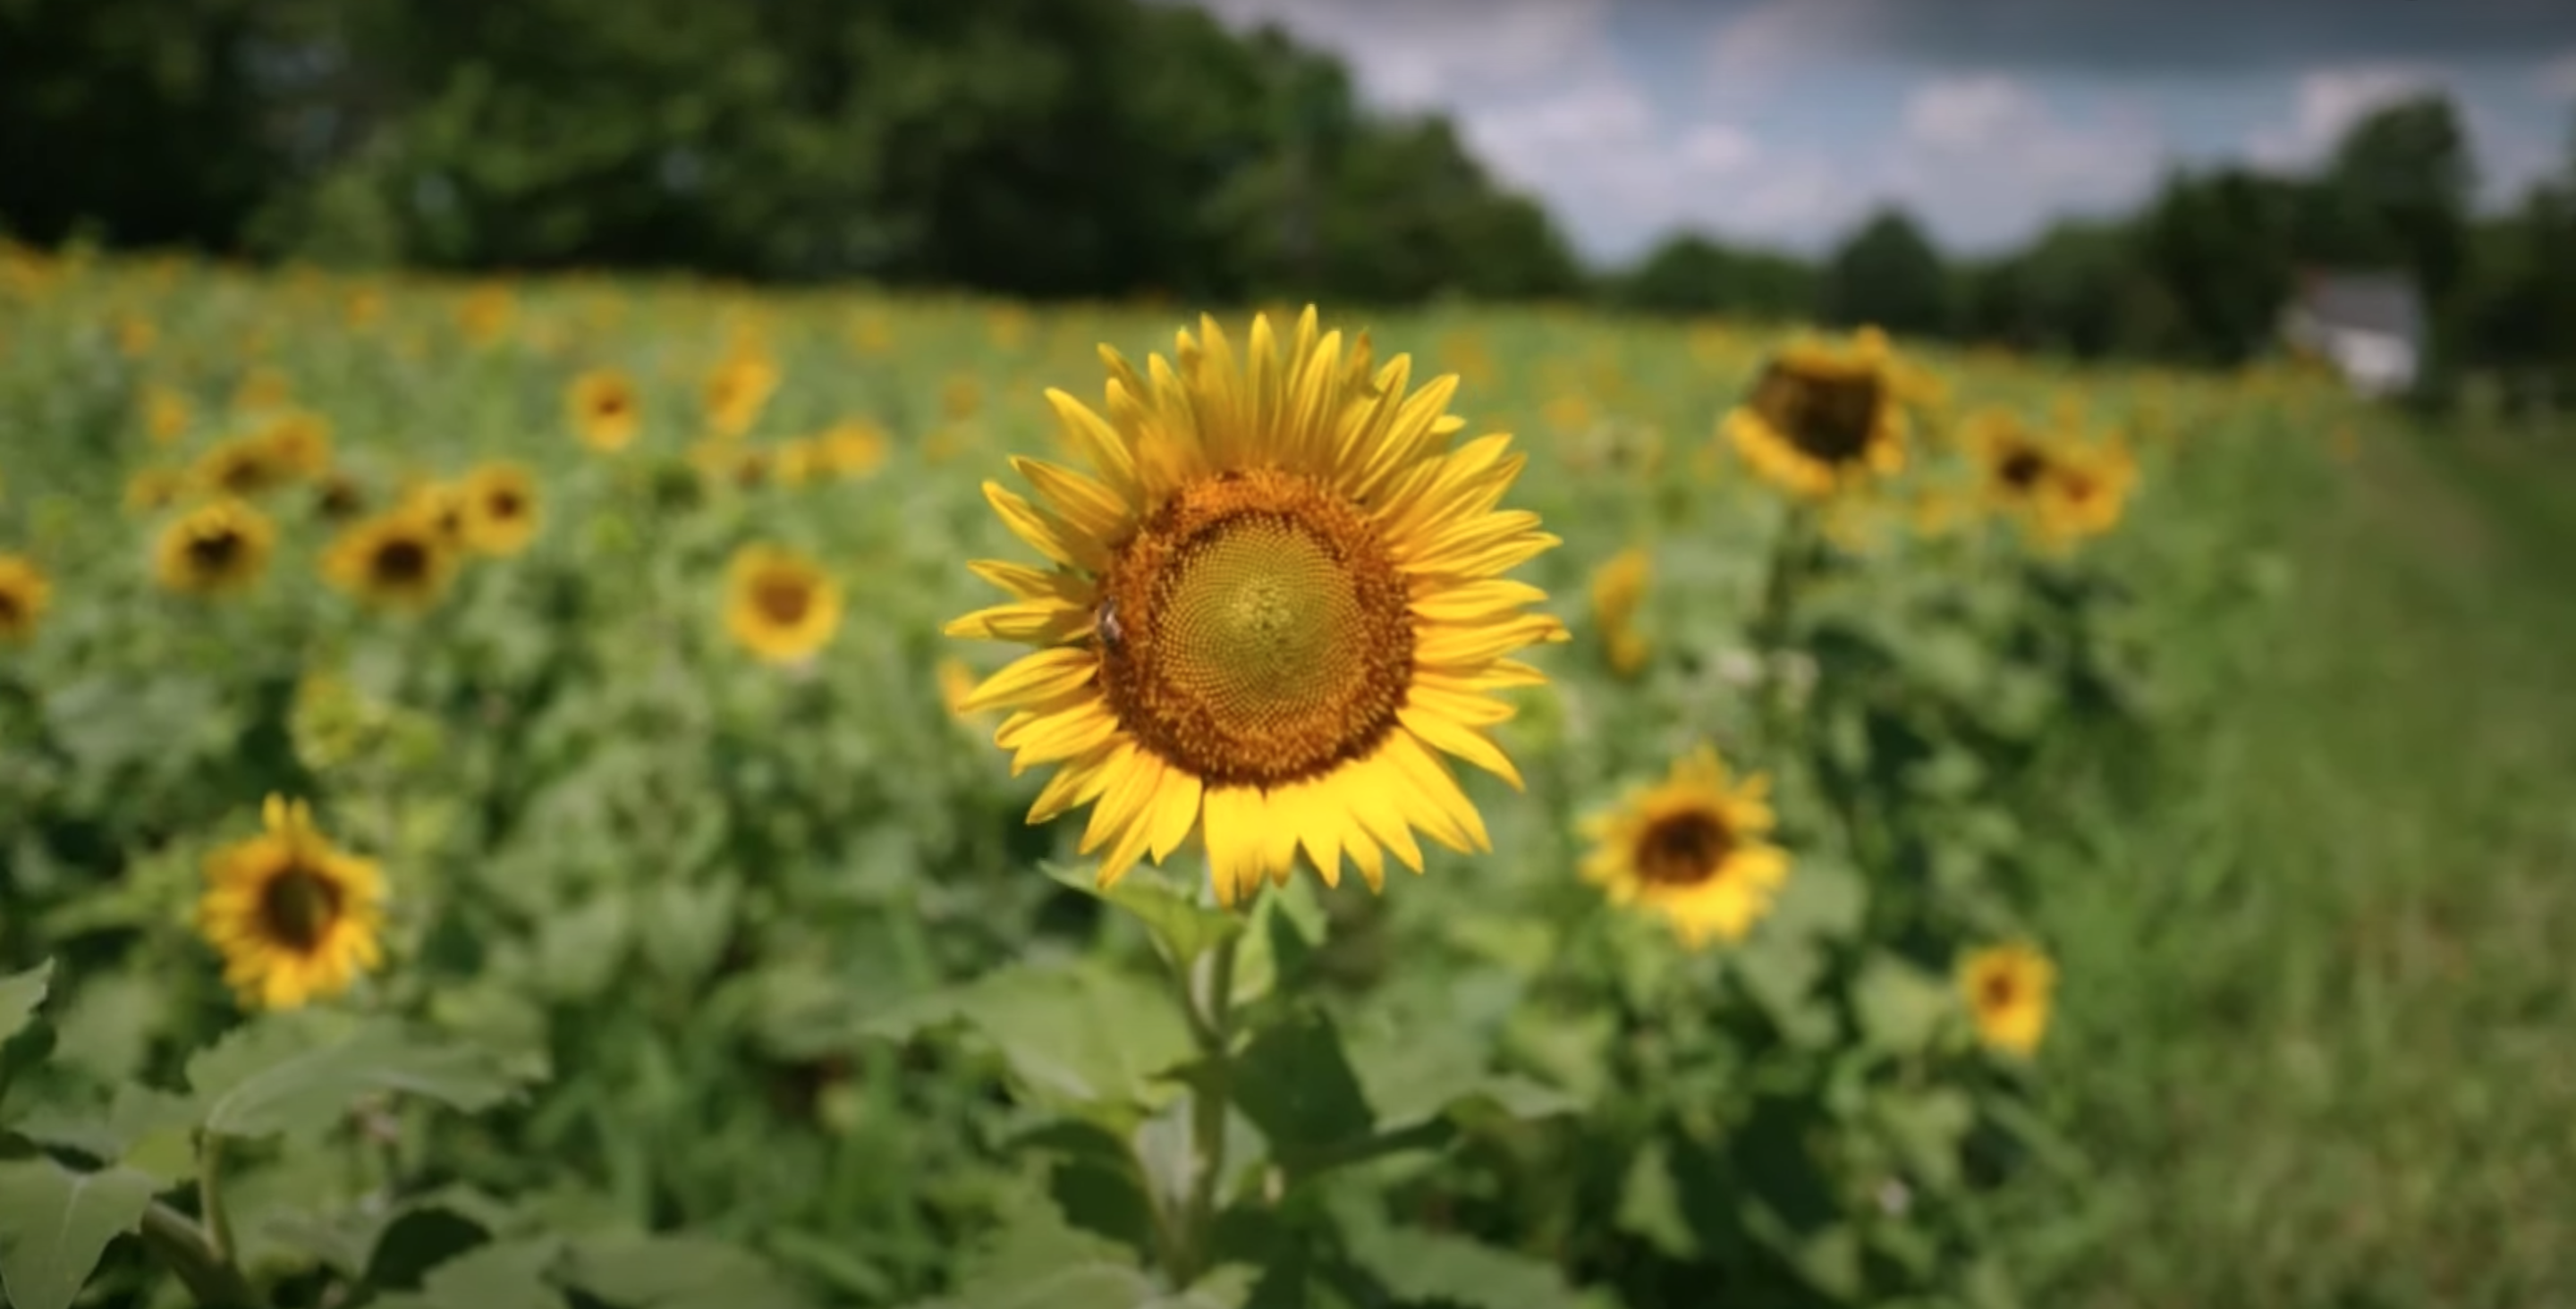 A sunflower image from the Farm Aid live stream.